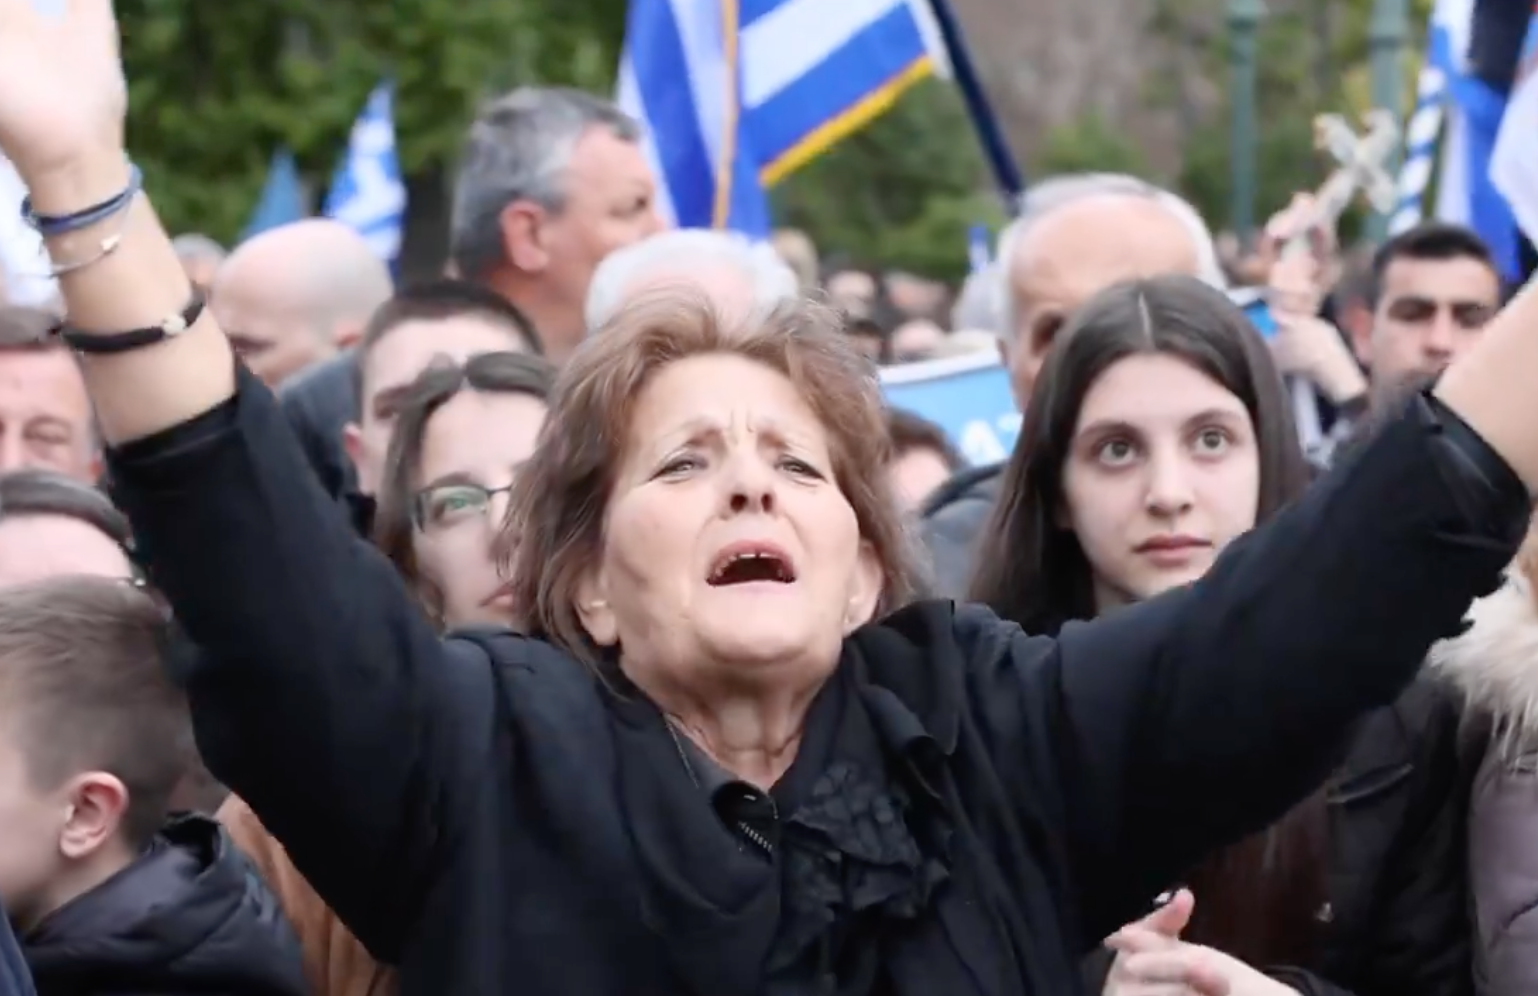 Greece will soon legalize same-sex marriage. The church is rallying against the &#8220;satanic&#8221; law